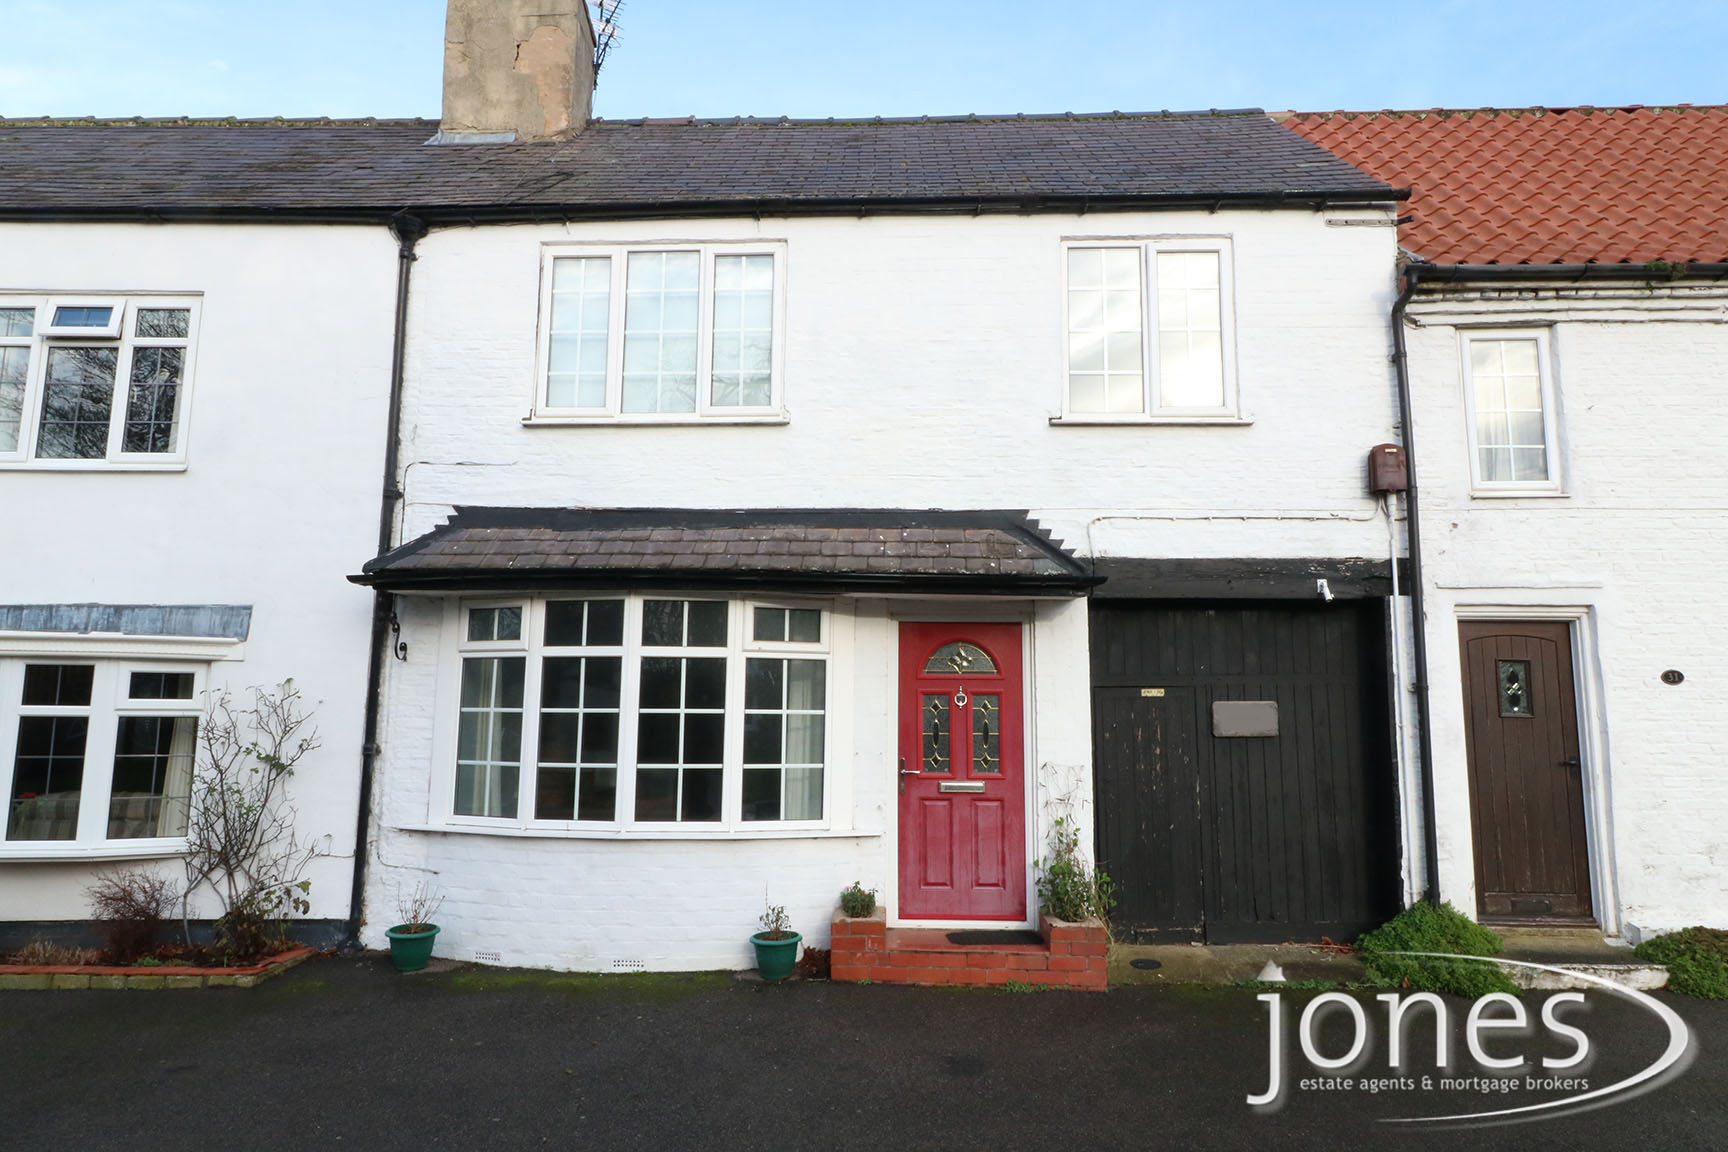 Home for Sale Let - Photo 01 The Green, Bishopton,Stockton on Tees,TS21 1HE